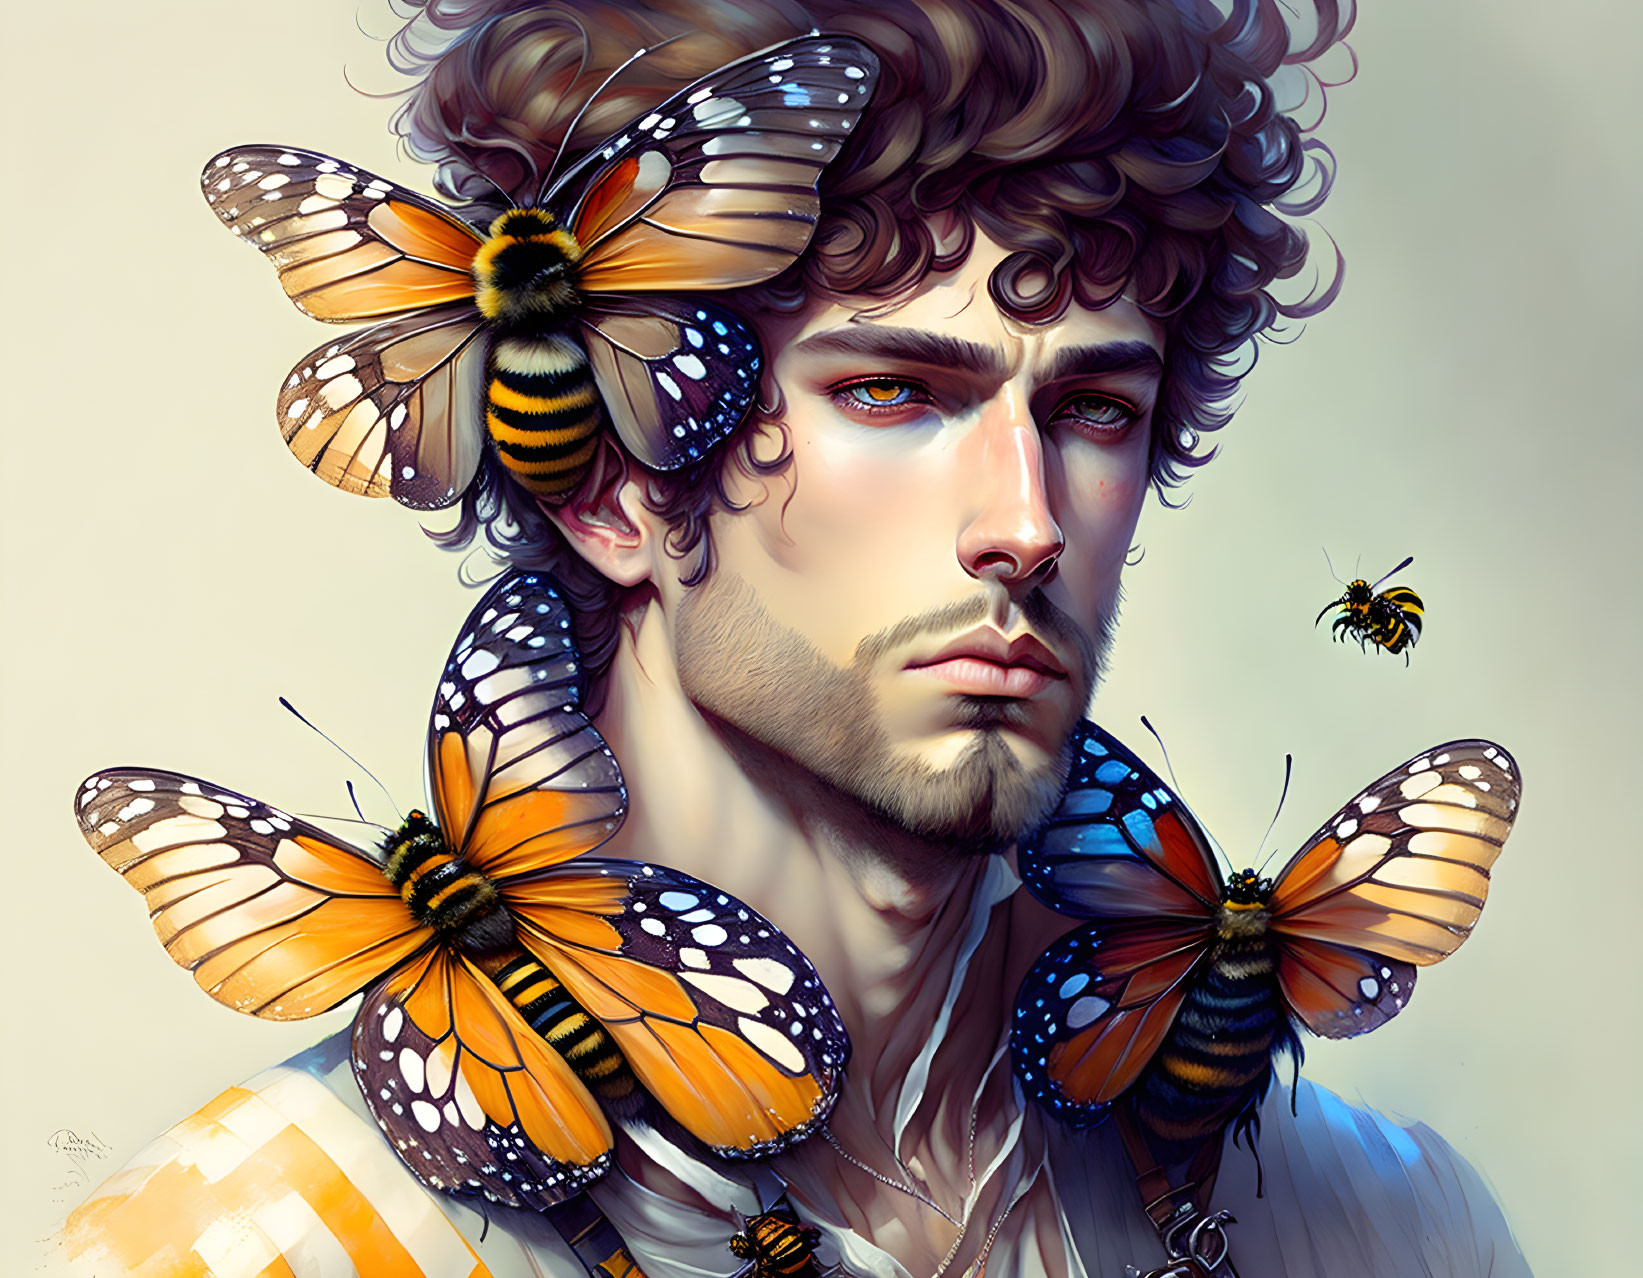 Man with Curly Hair and Blue Eyes Amid Colorful Butterflies and Bee